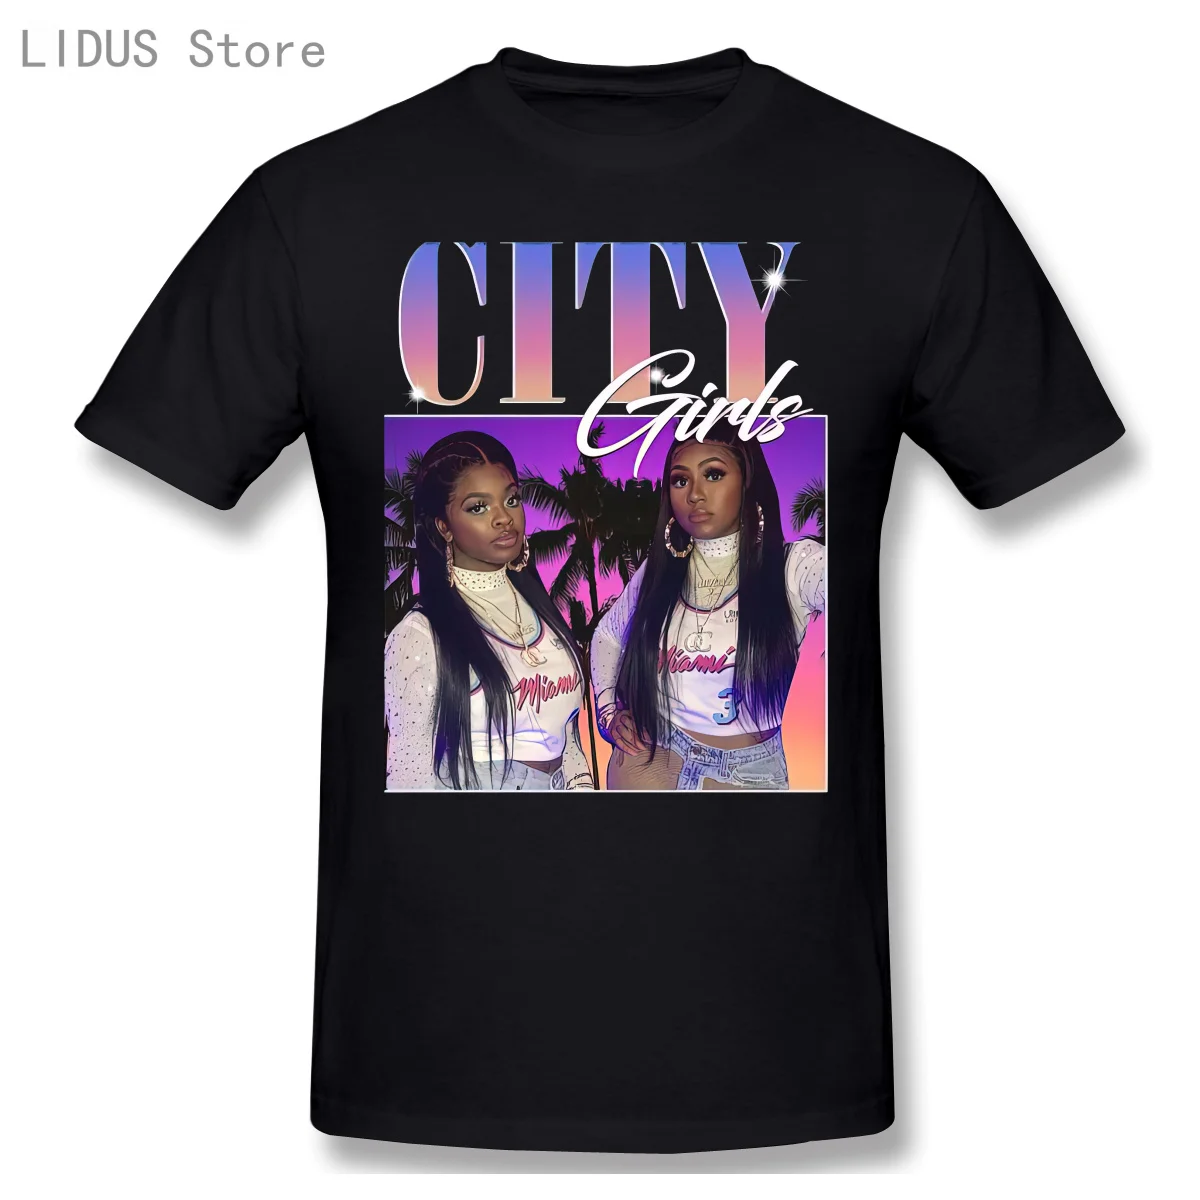 Фото - City Girls T Shirt Rap Hip Hop 90s Retro Vintage Tshirt Men Fashion O-neck 100% Cotton T-shirts Tee Top tyburn classically trained playstation game vintage t shirts android videogame pc computer tshirt 100% cotton fabric o neck